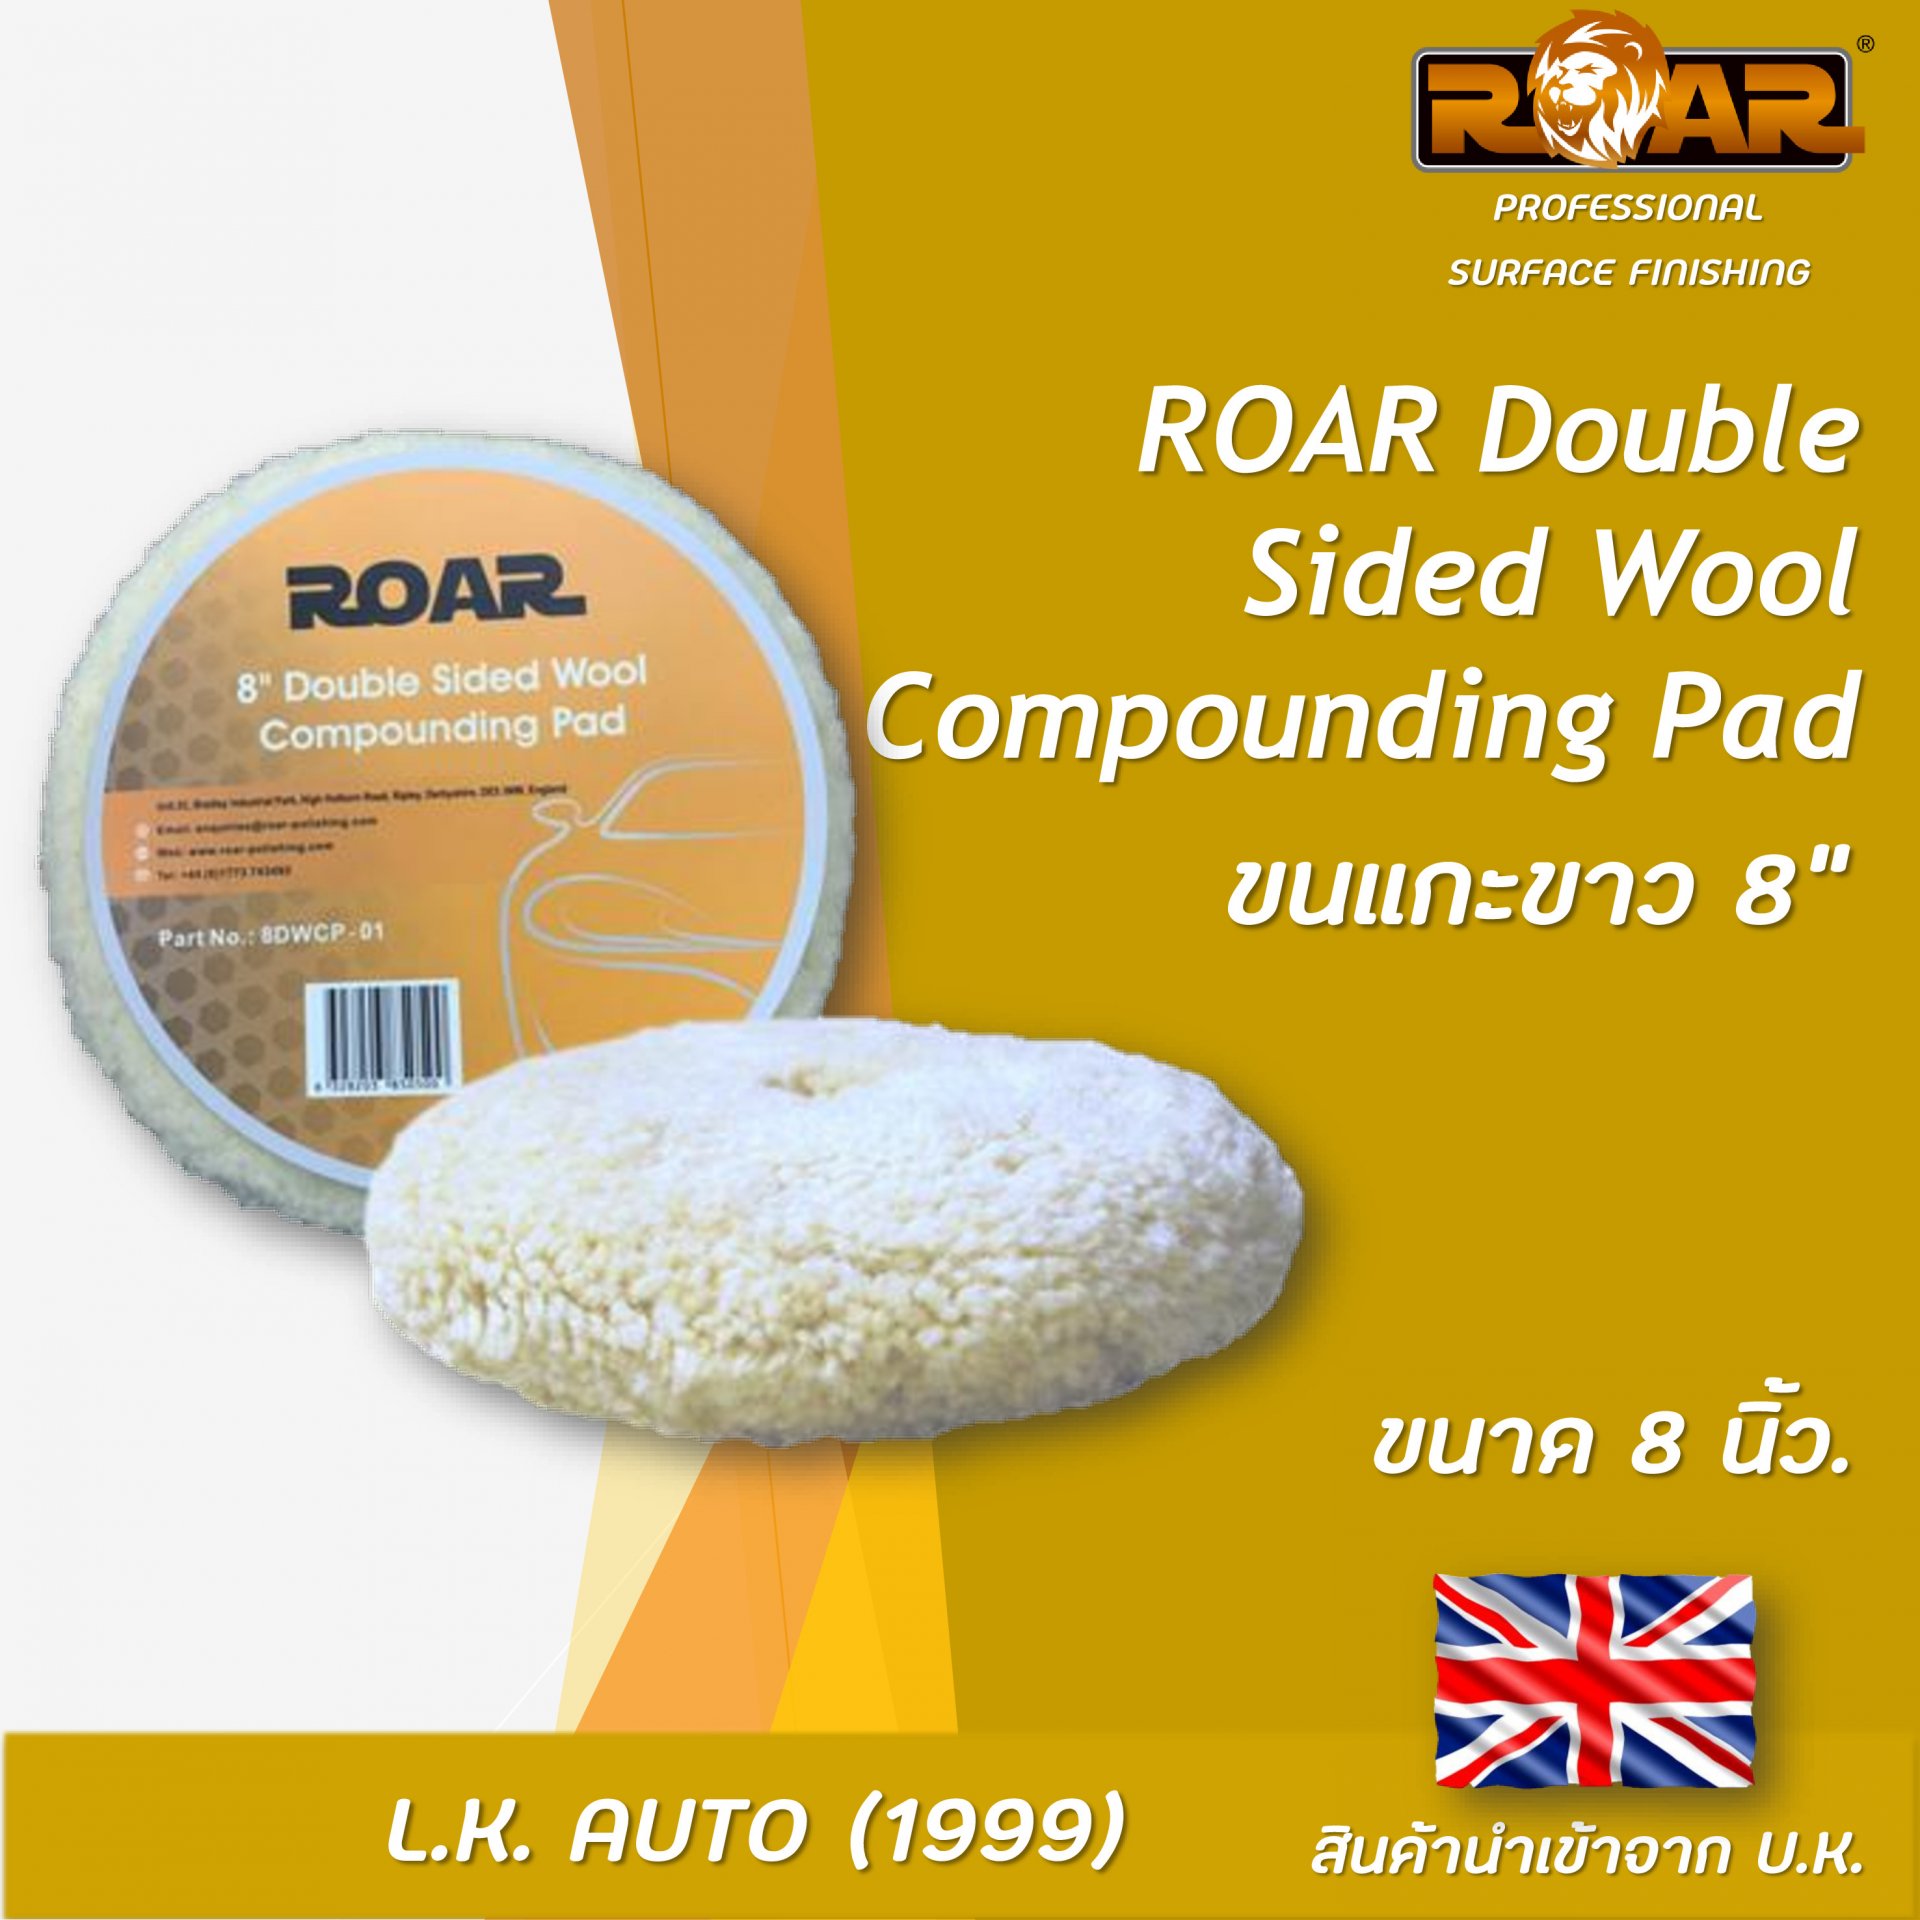 8” Double Sided Wool Compounding Pad